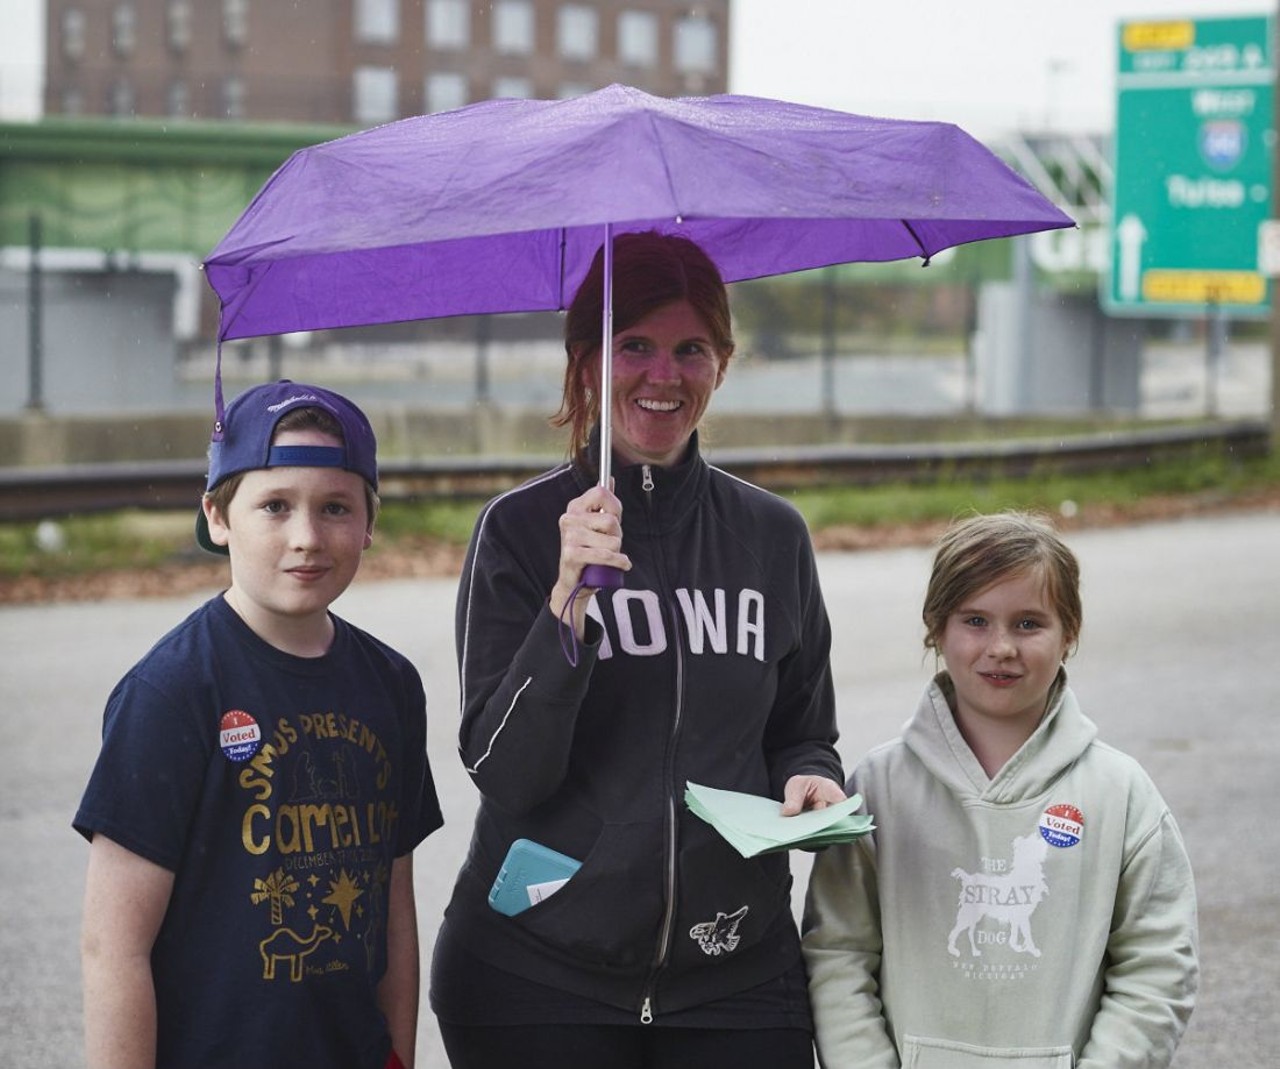 Courtney McDermott, photographed in St. Louis with daughter Maeve Rasmussen, 9, and son Nolan Rasmussen, 12
"My parents always took us voting with them. They instilled at an early age that this is something that is really important.
"Hillary's a feminist; I&#146;m a feminist. She fights for equal rights for women and for people of color. And I think that given all that has happened especially in the St. Louis community, she is someone who will make sure that we continue to move things forward. I think a vote for Donald Trump is turning things backwards."